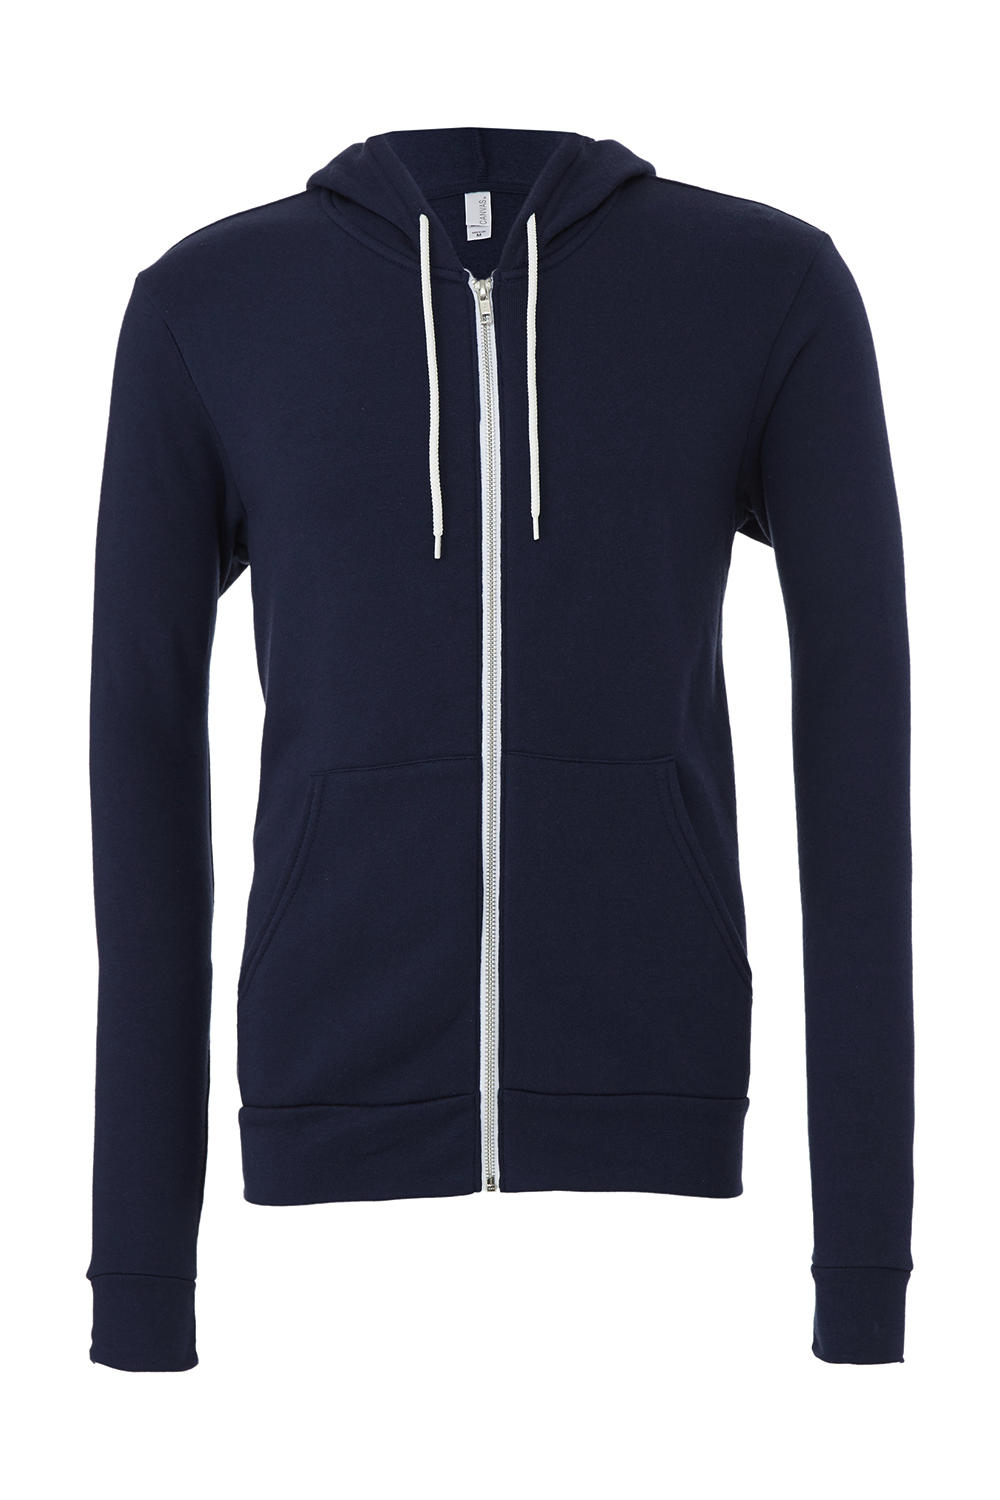  Unisex Poly-Cotton Full Zip Hoodie in Farbe Navy